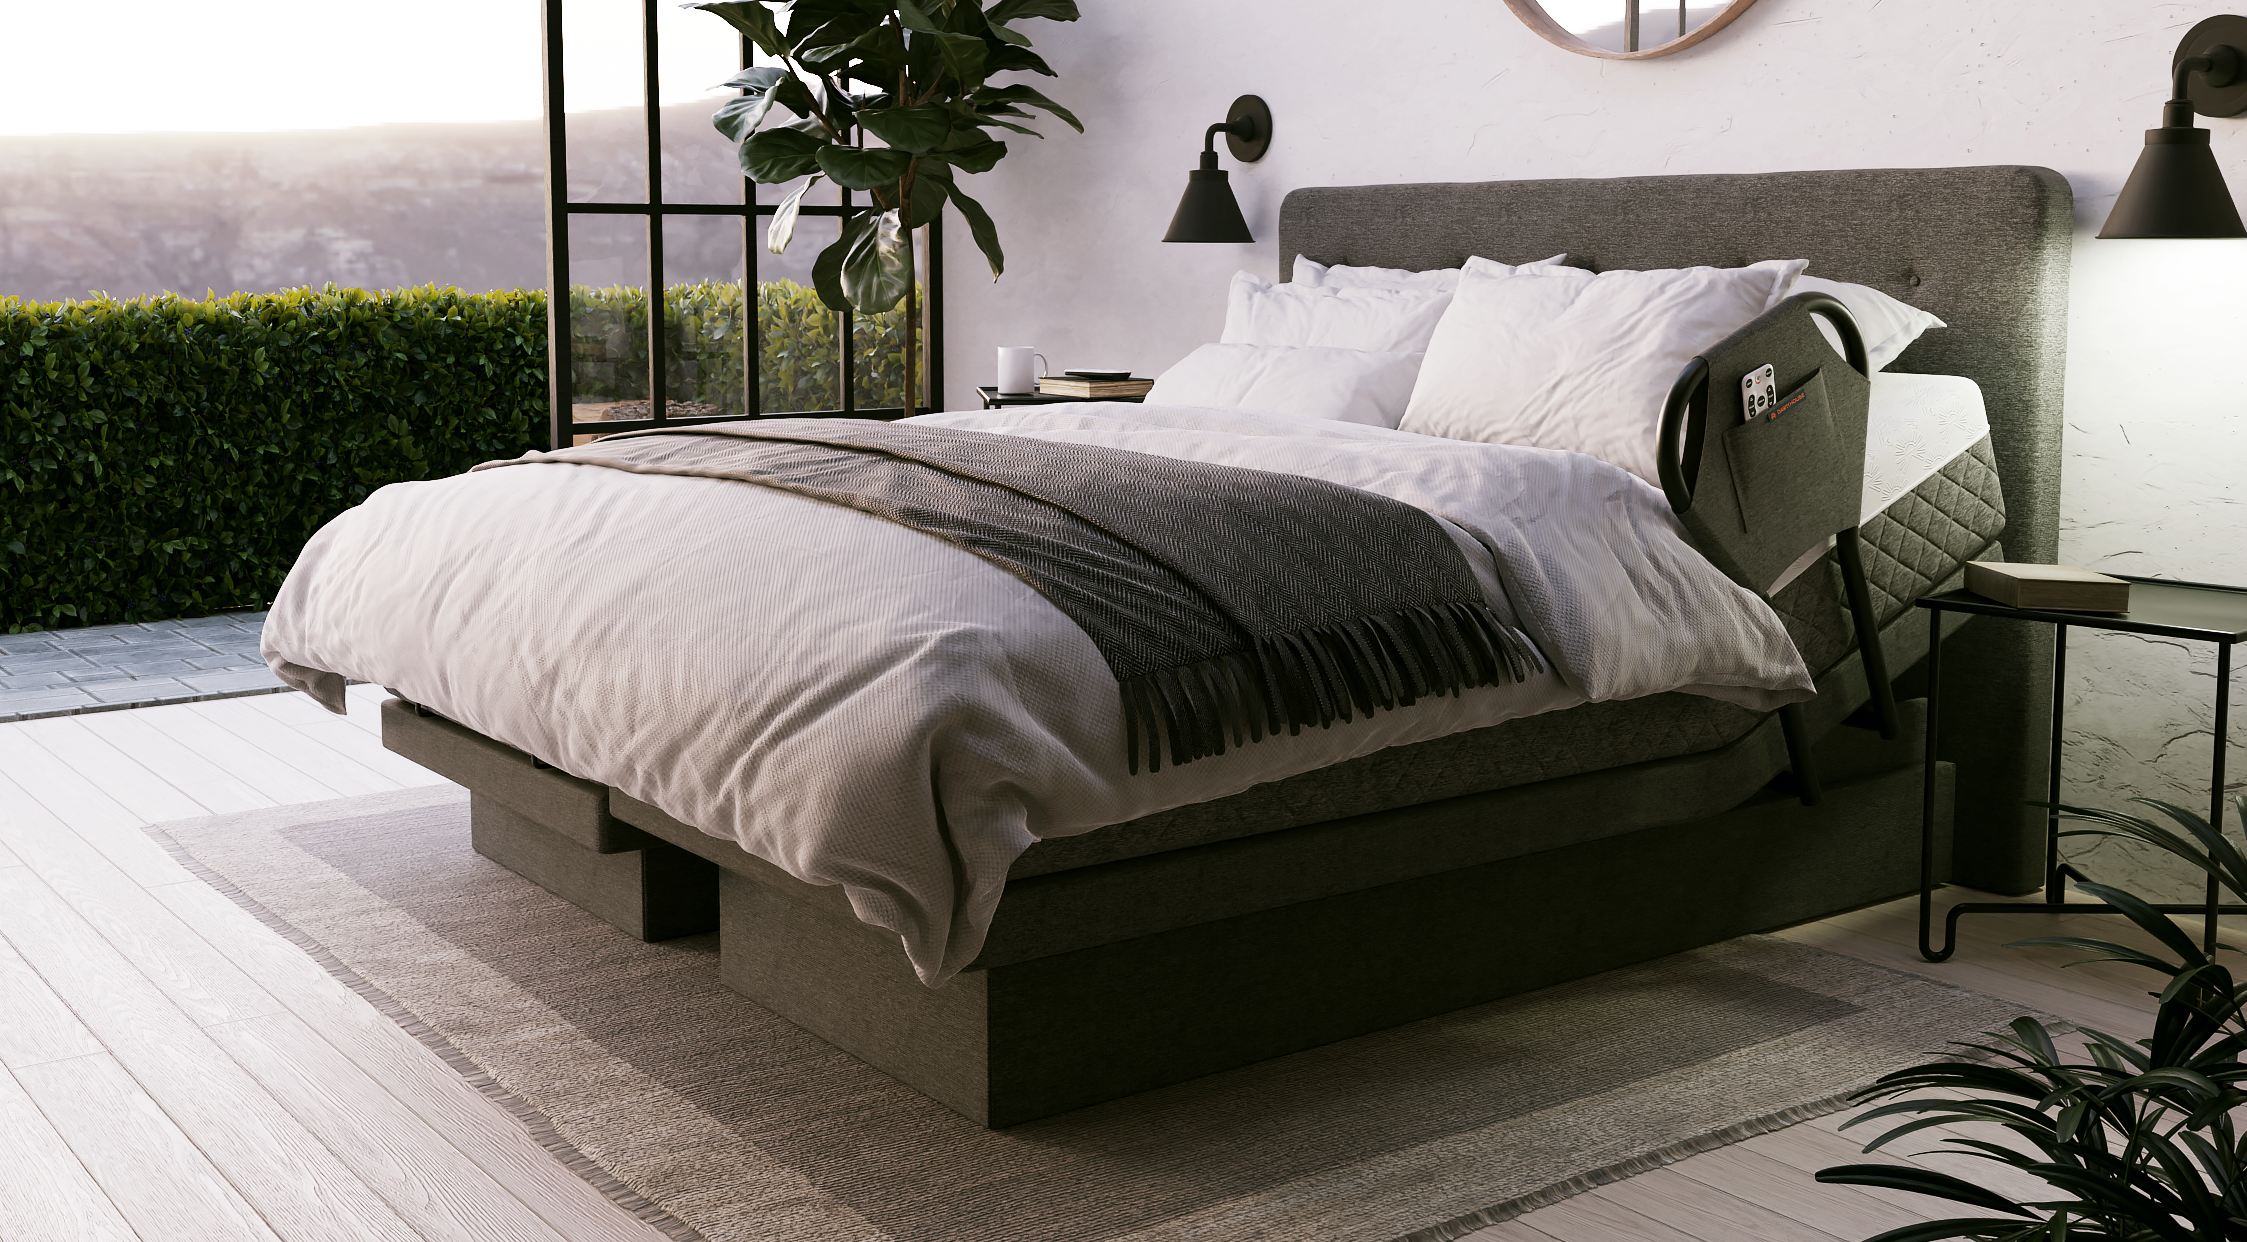 Los Angeles Dawn House bed